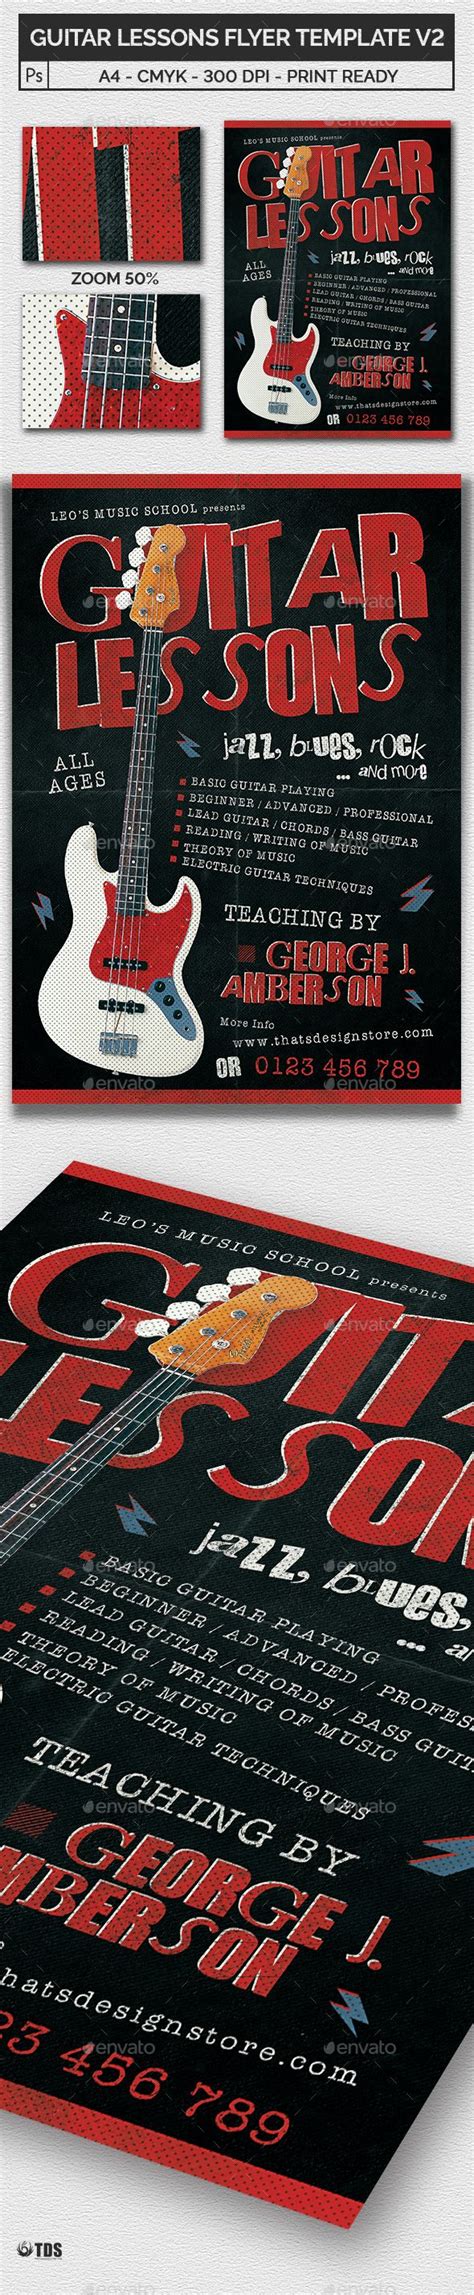 The guitar lessons free flyer template was designed to promote your next guitar lessions learning and music party! Guitar Lessons Flyer Template V2 | Guitar lessons, Flyer template